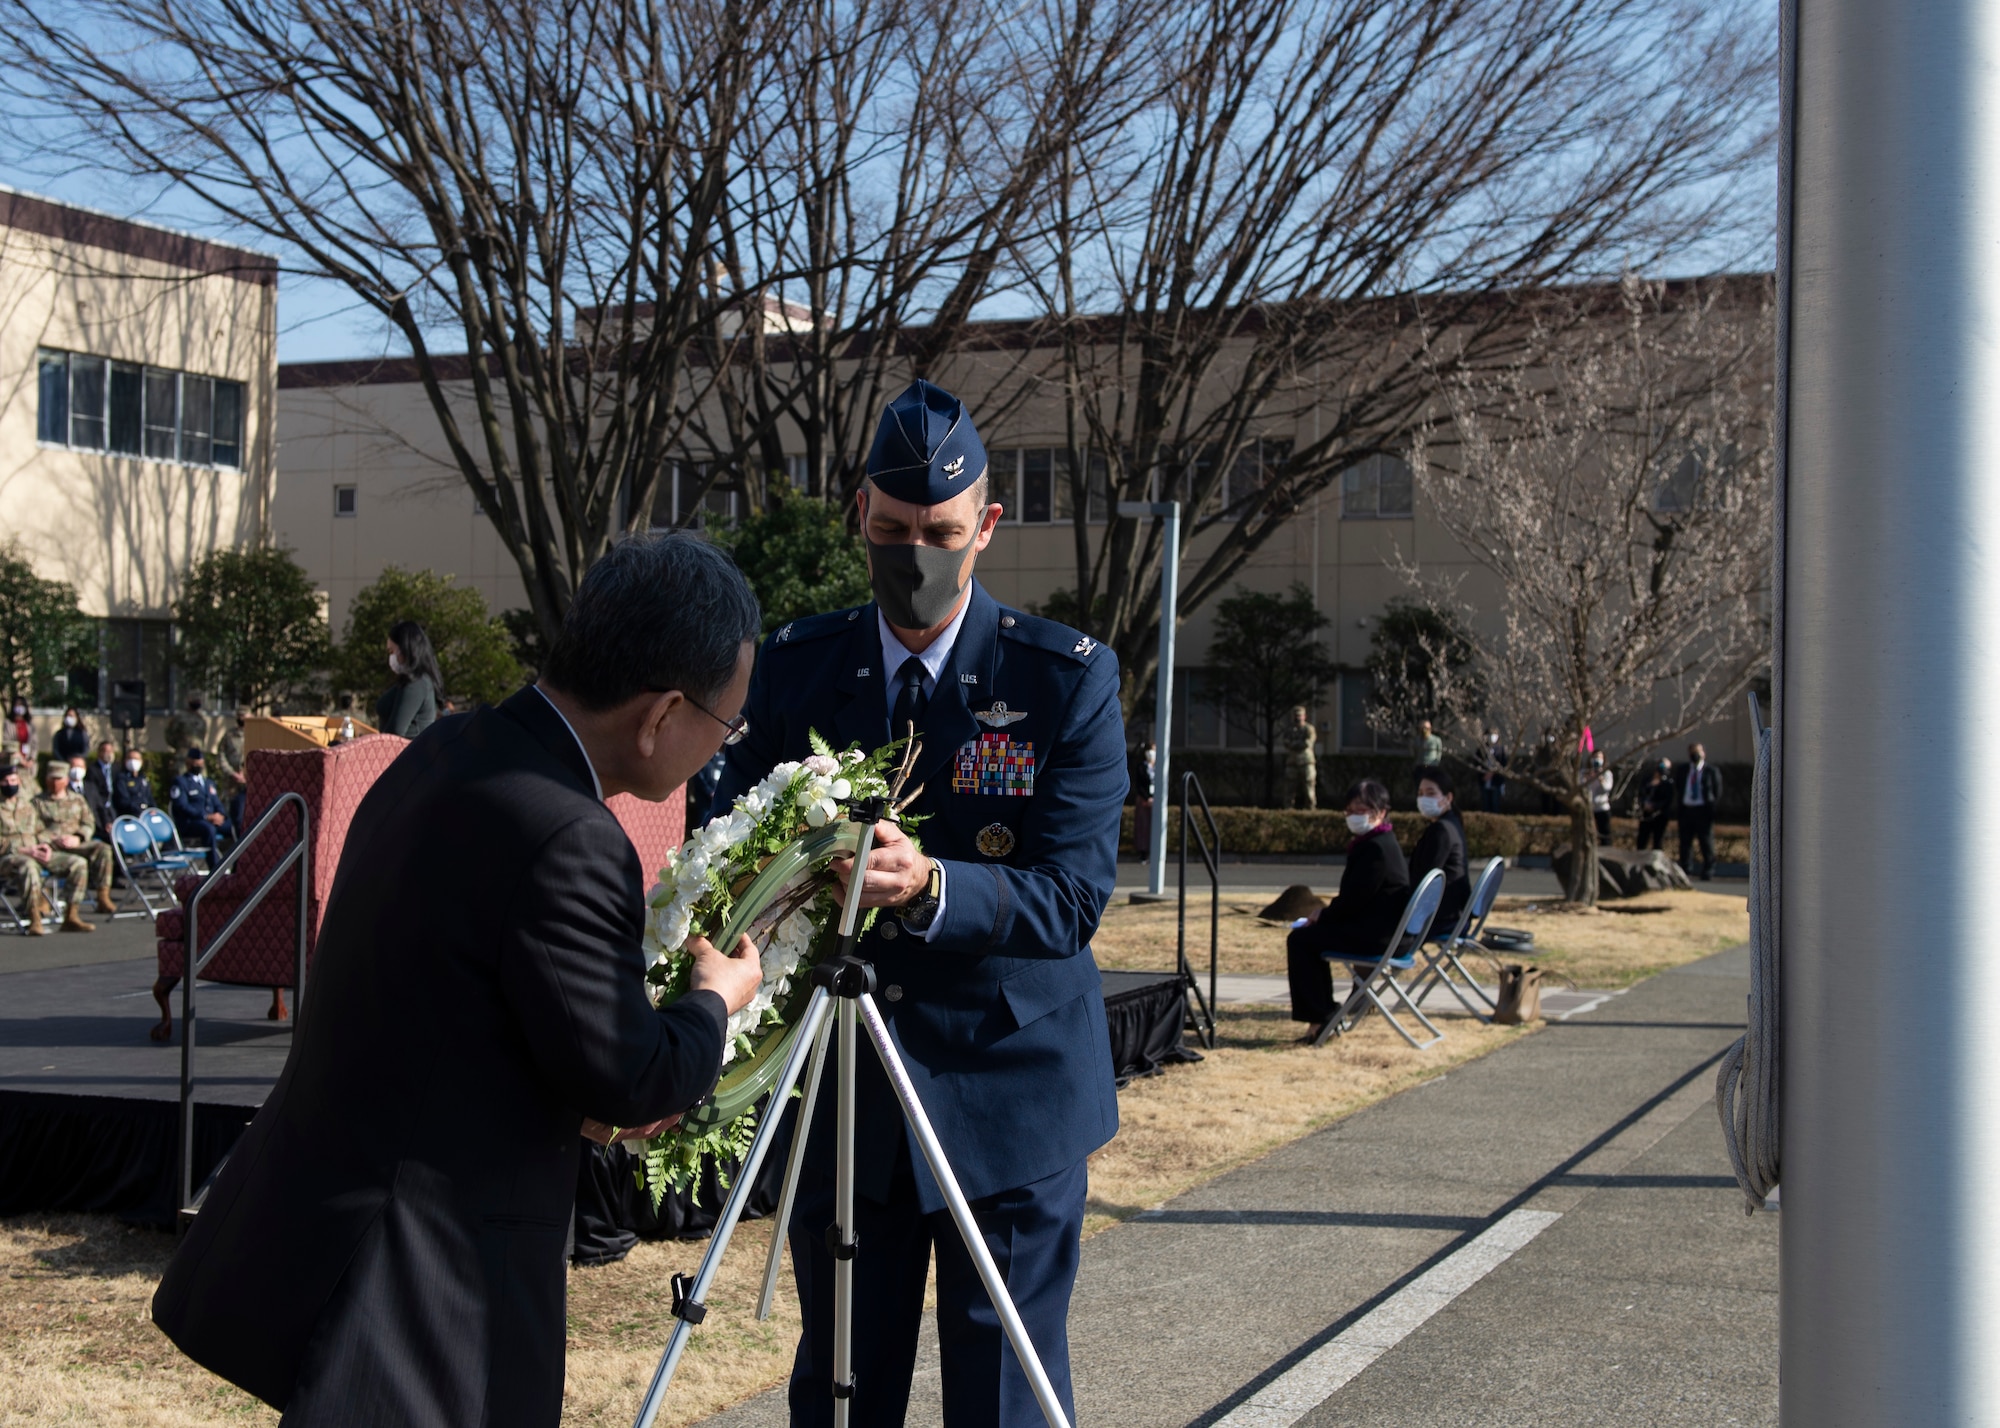 Col. Andrew Campbell, 374th Airlift Wing commander, and Takahisa Matsuda, North Kanto Defense Bureau director general place a wreath at the base of a Japanese flagpole during a ceremony for the 10th Anniversary of the Great East Japan Earthquake and the Operation Tomodachi support efforts at Yokota Air Base, Japan, March 11, 2021. The wreath represents the loss of nearly 16,000 lives during the earthquake, and the tsunami that followed. (U.S. Air Force photo by Staff Sgt. Joshua Edwards)